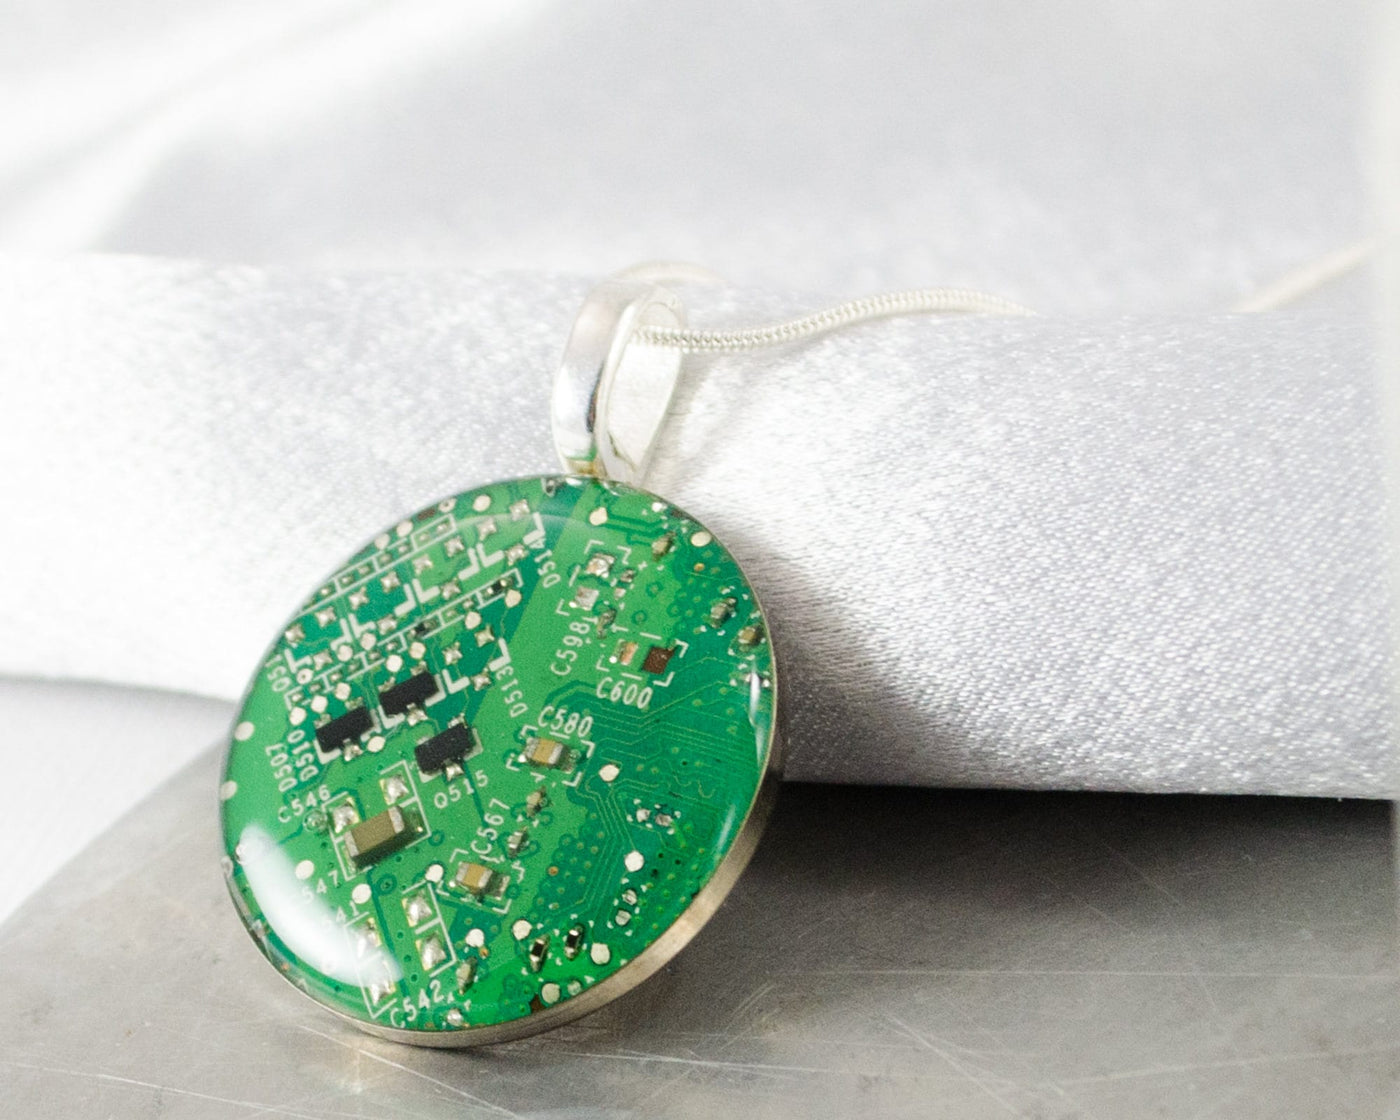 Circuit Board Necklace LARGE Green, Recycled Motherboard Jewelry, Wearable Technology, Computer Gift, Computer Programmer, Upcycled Geekery